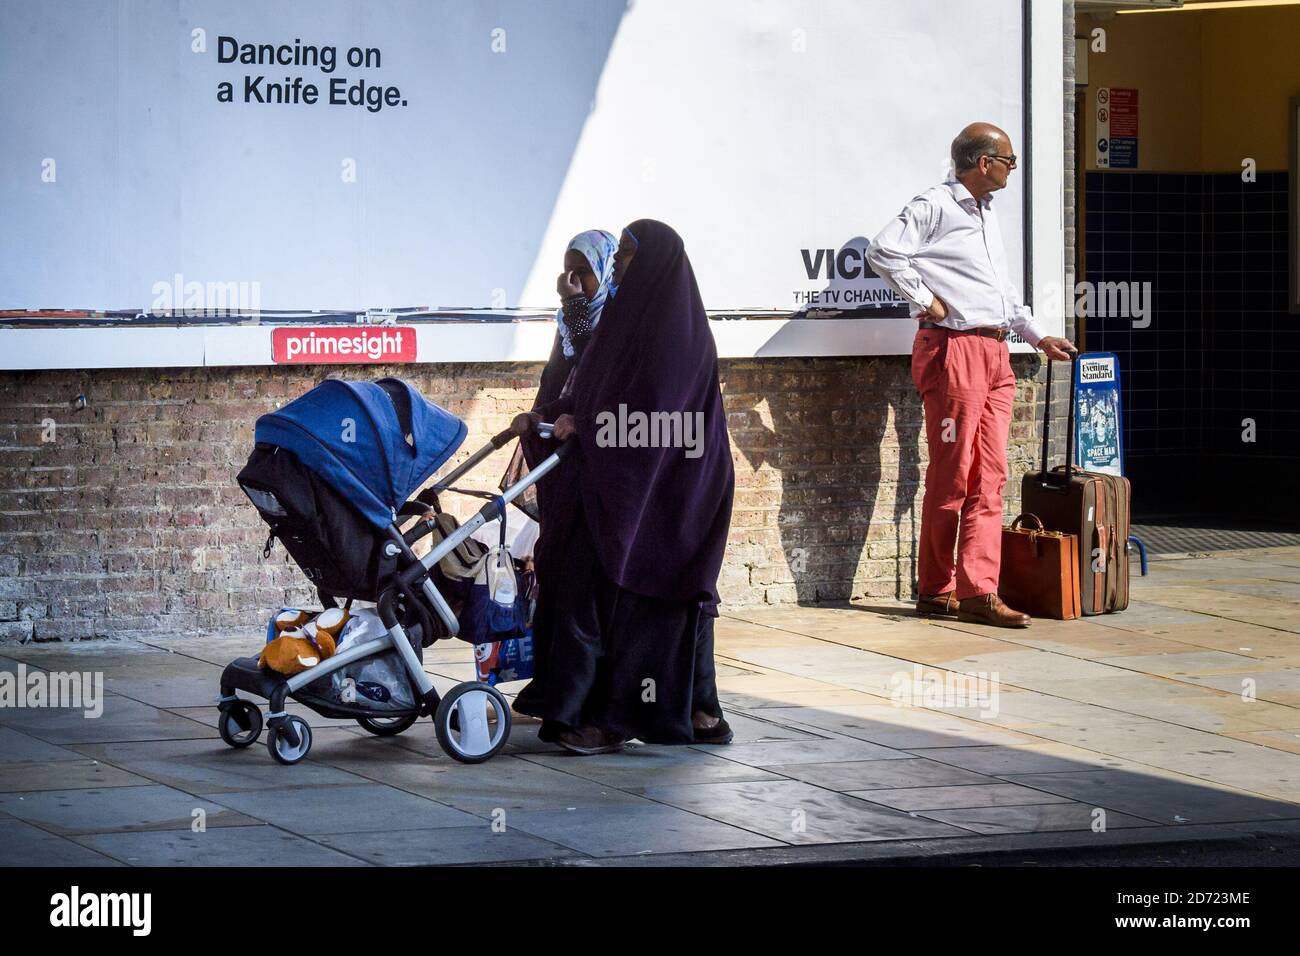 Muslim women along the Uxbridge Road in Shepherd's Bush, west London. September 30th will mark 100 days since the UK voted to leave the EU, during which time reported anti-immigrant and islamophobic hate crimes have increased. Stock Photo